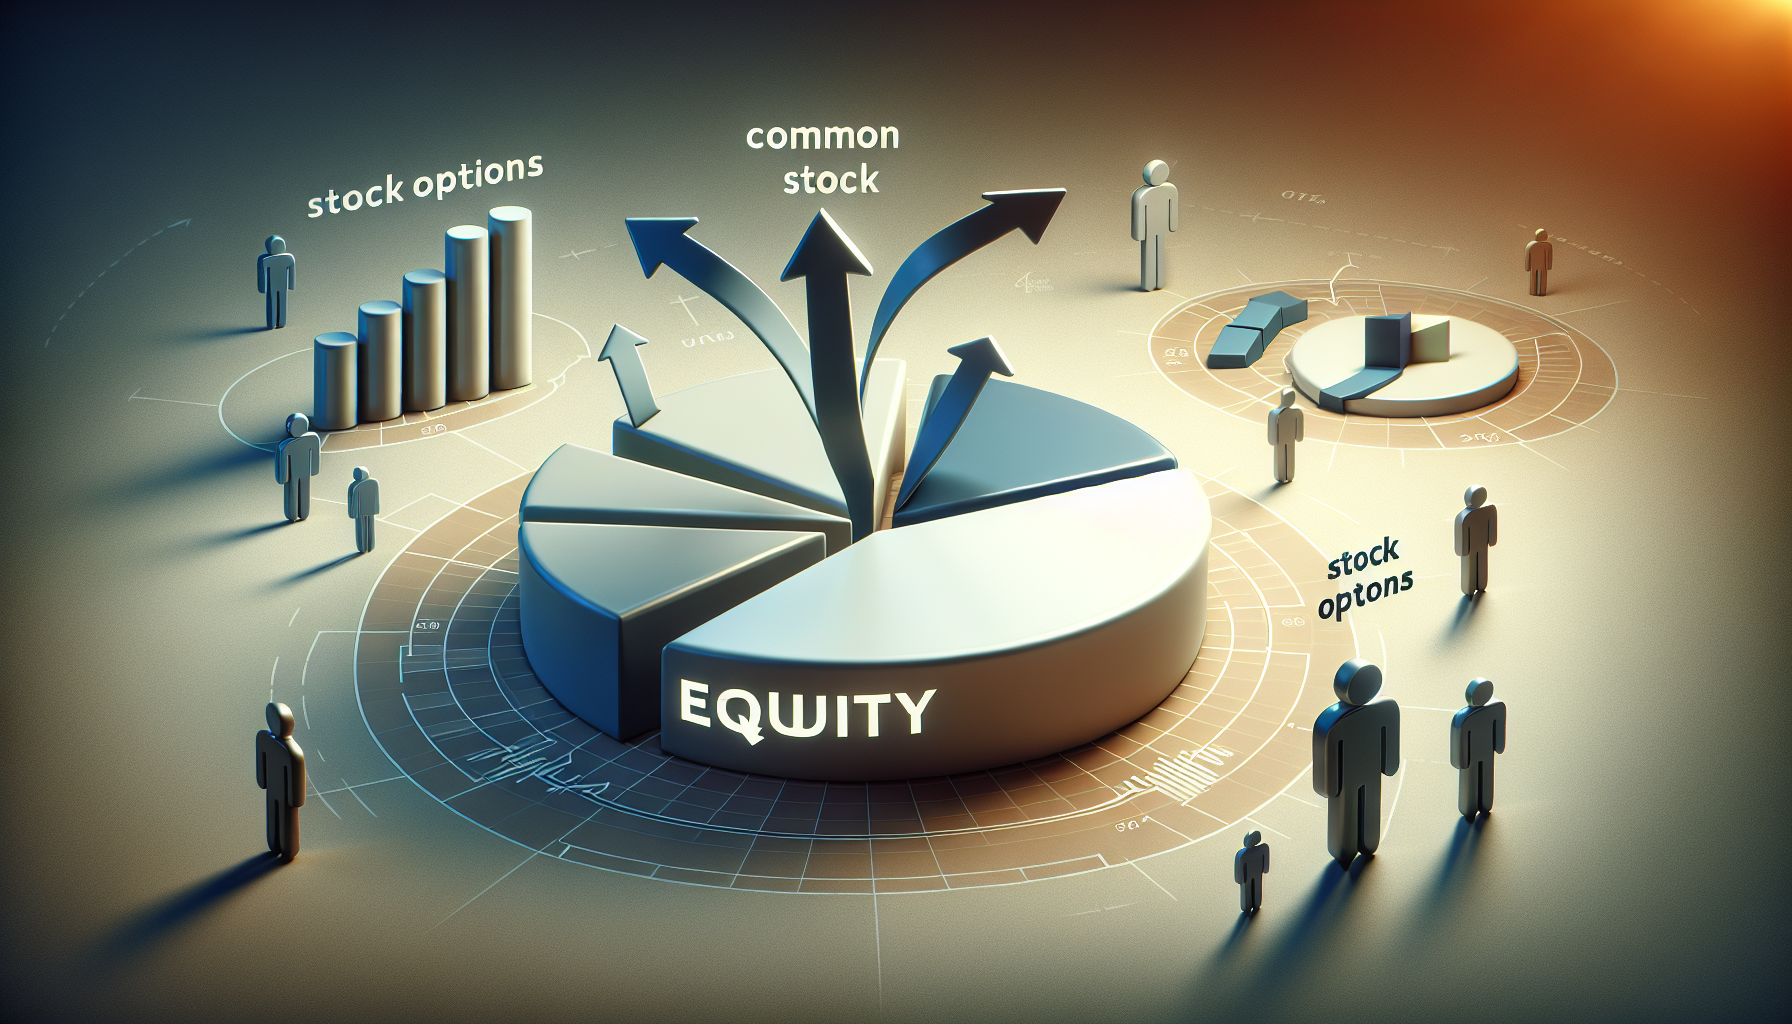 Illustration of common stock and stock options